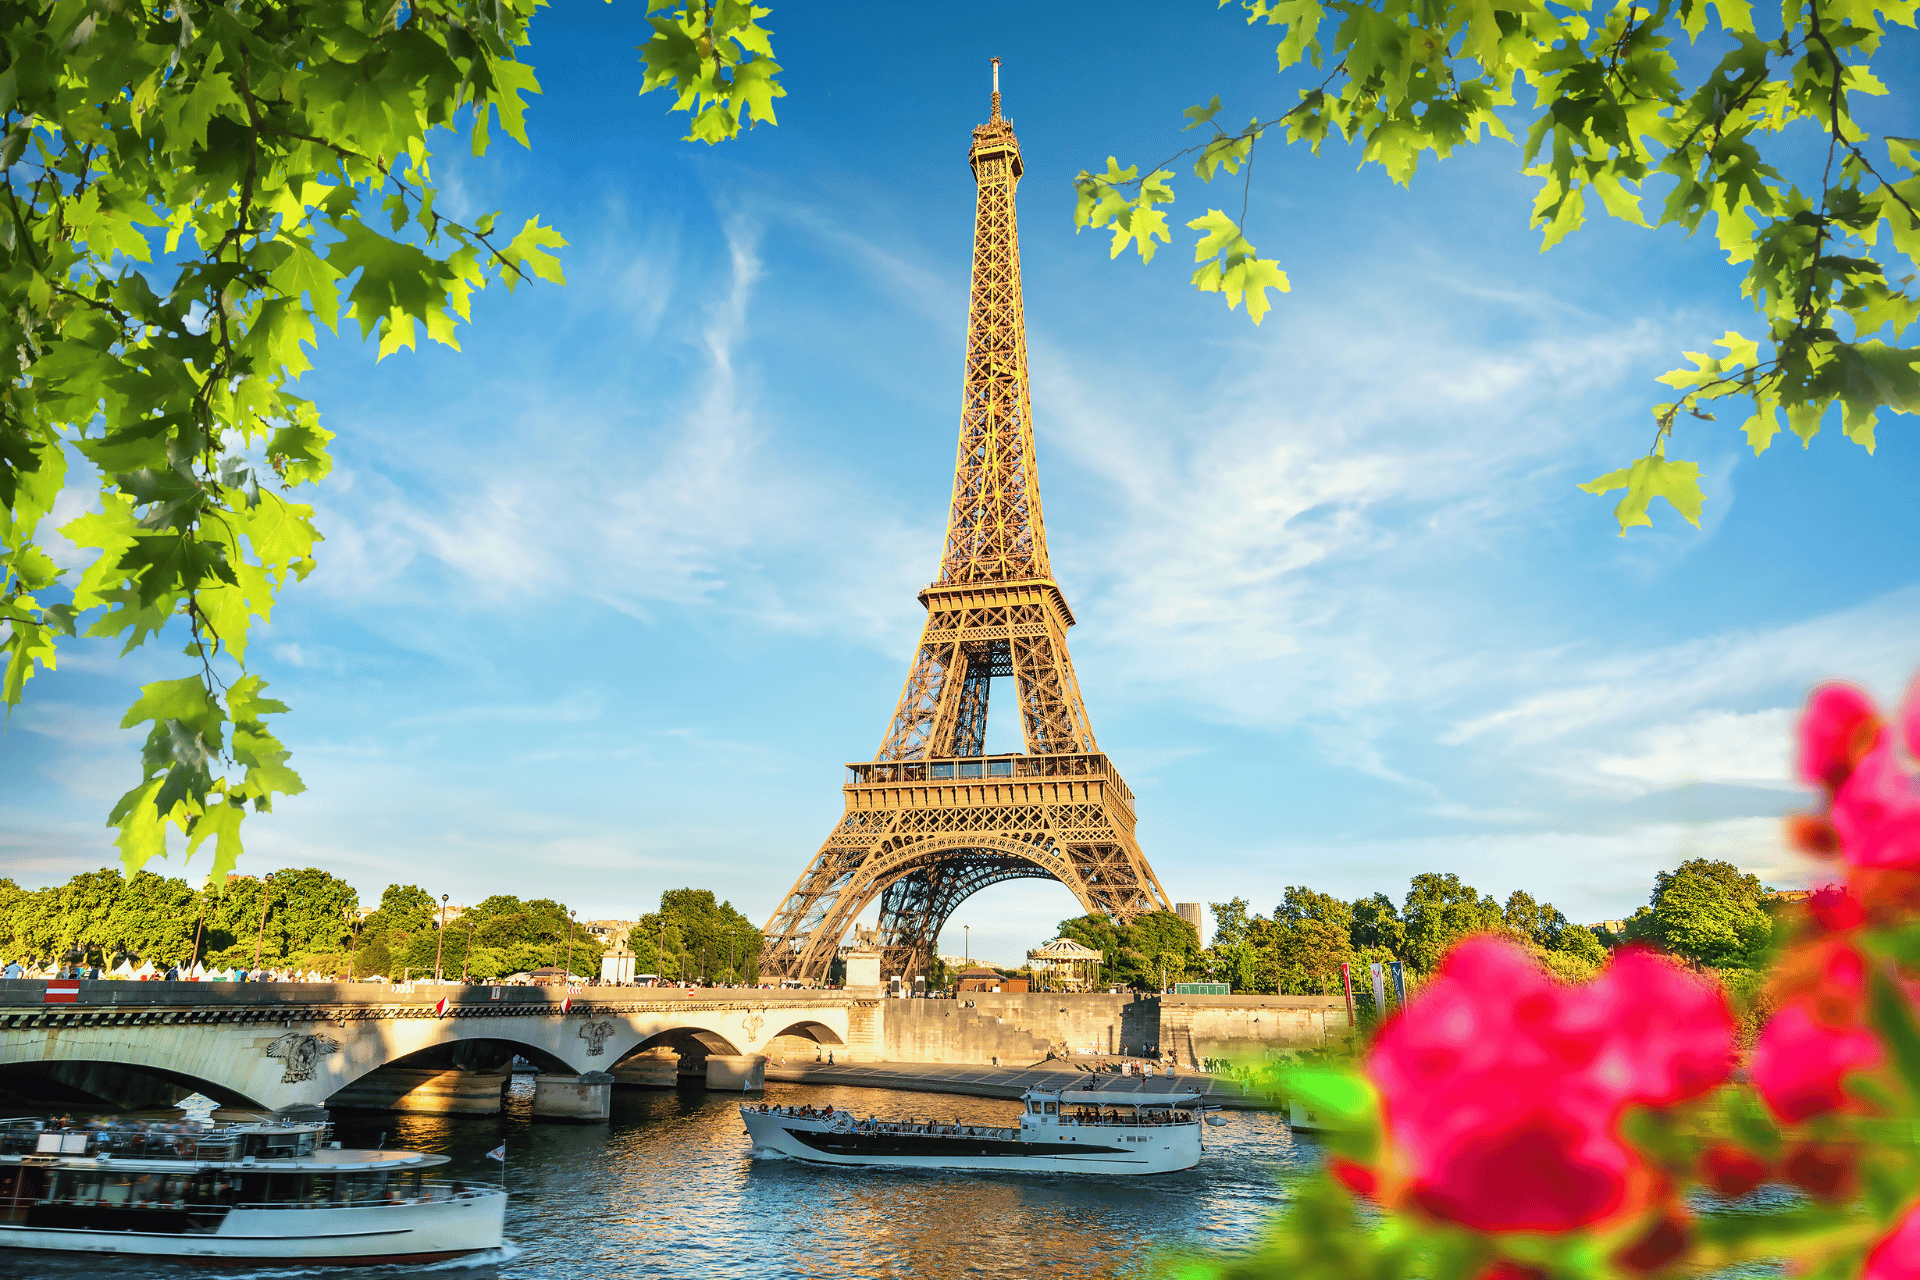 A view of the Eiffel Tower